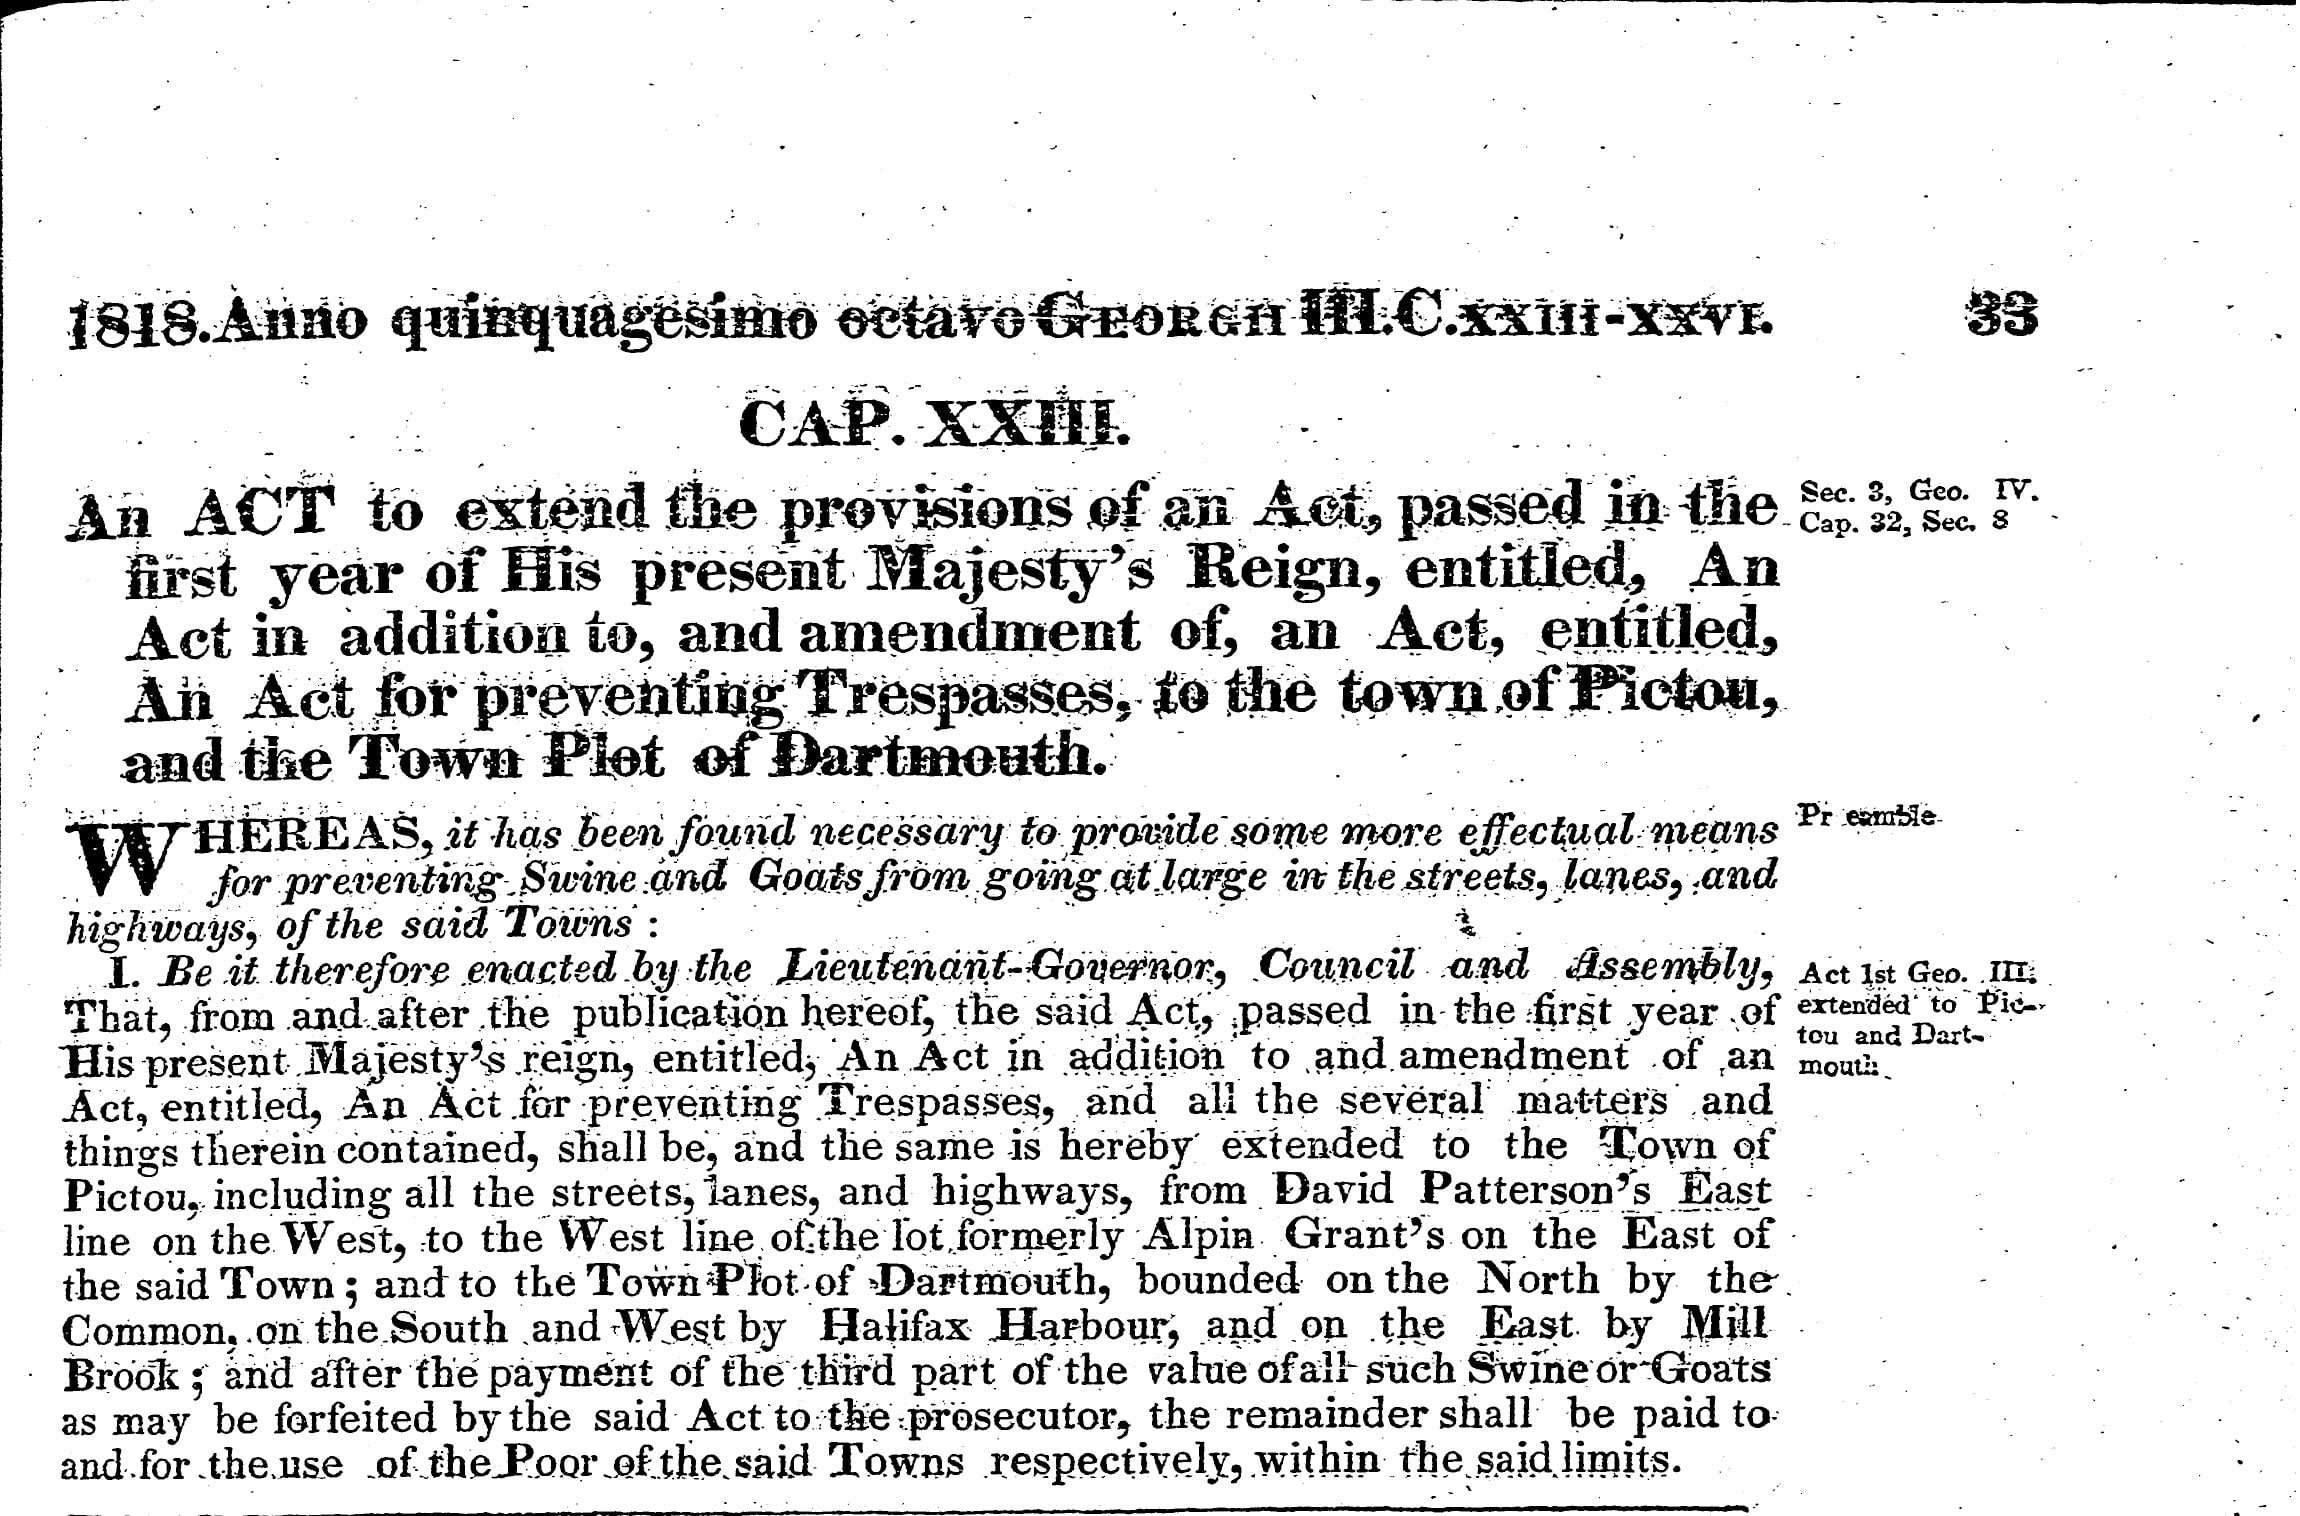 To extend the provisions of c15 of 1761 relating to Trespasses, to the Town of Pictou and the Town Plot of Dartmouth, 1818 c23